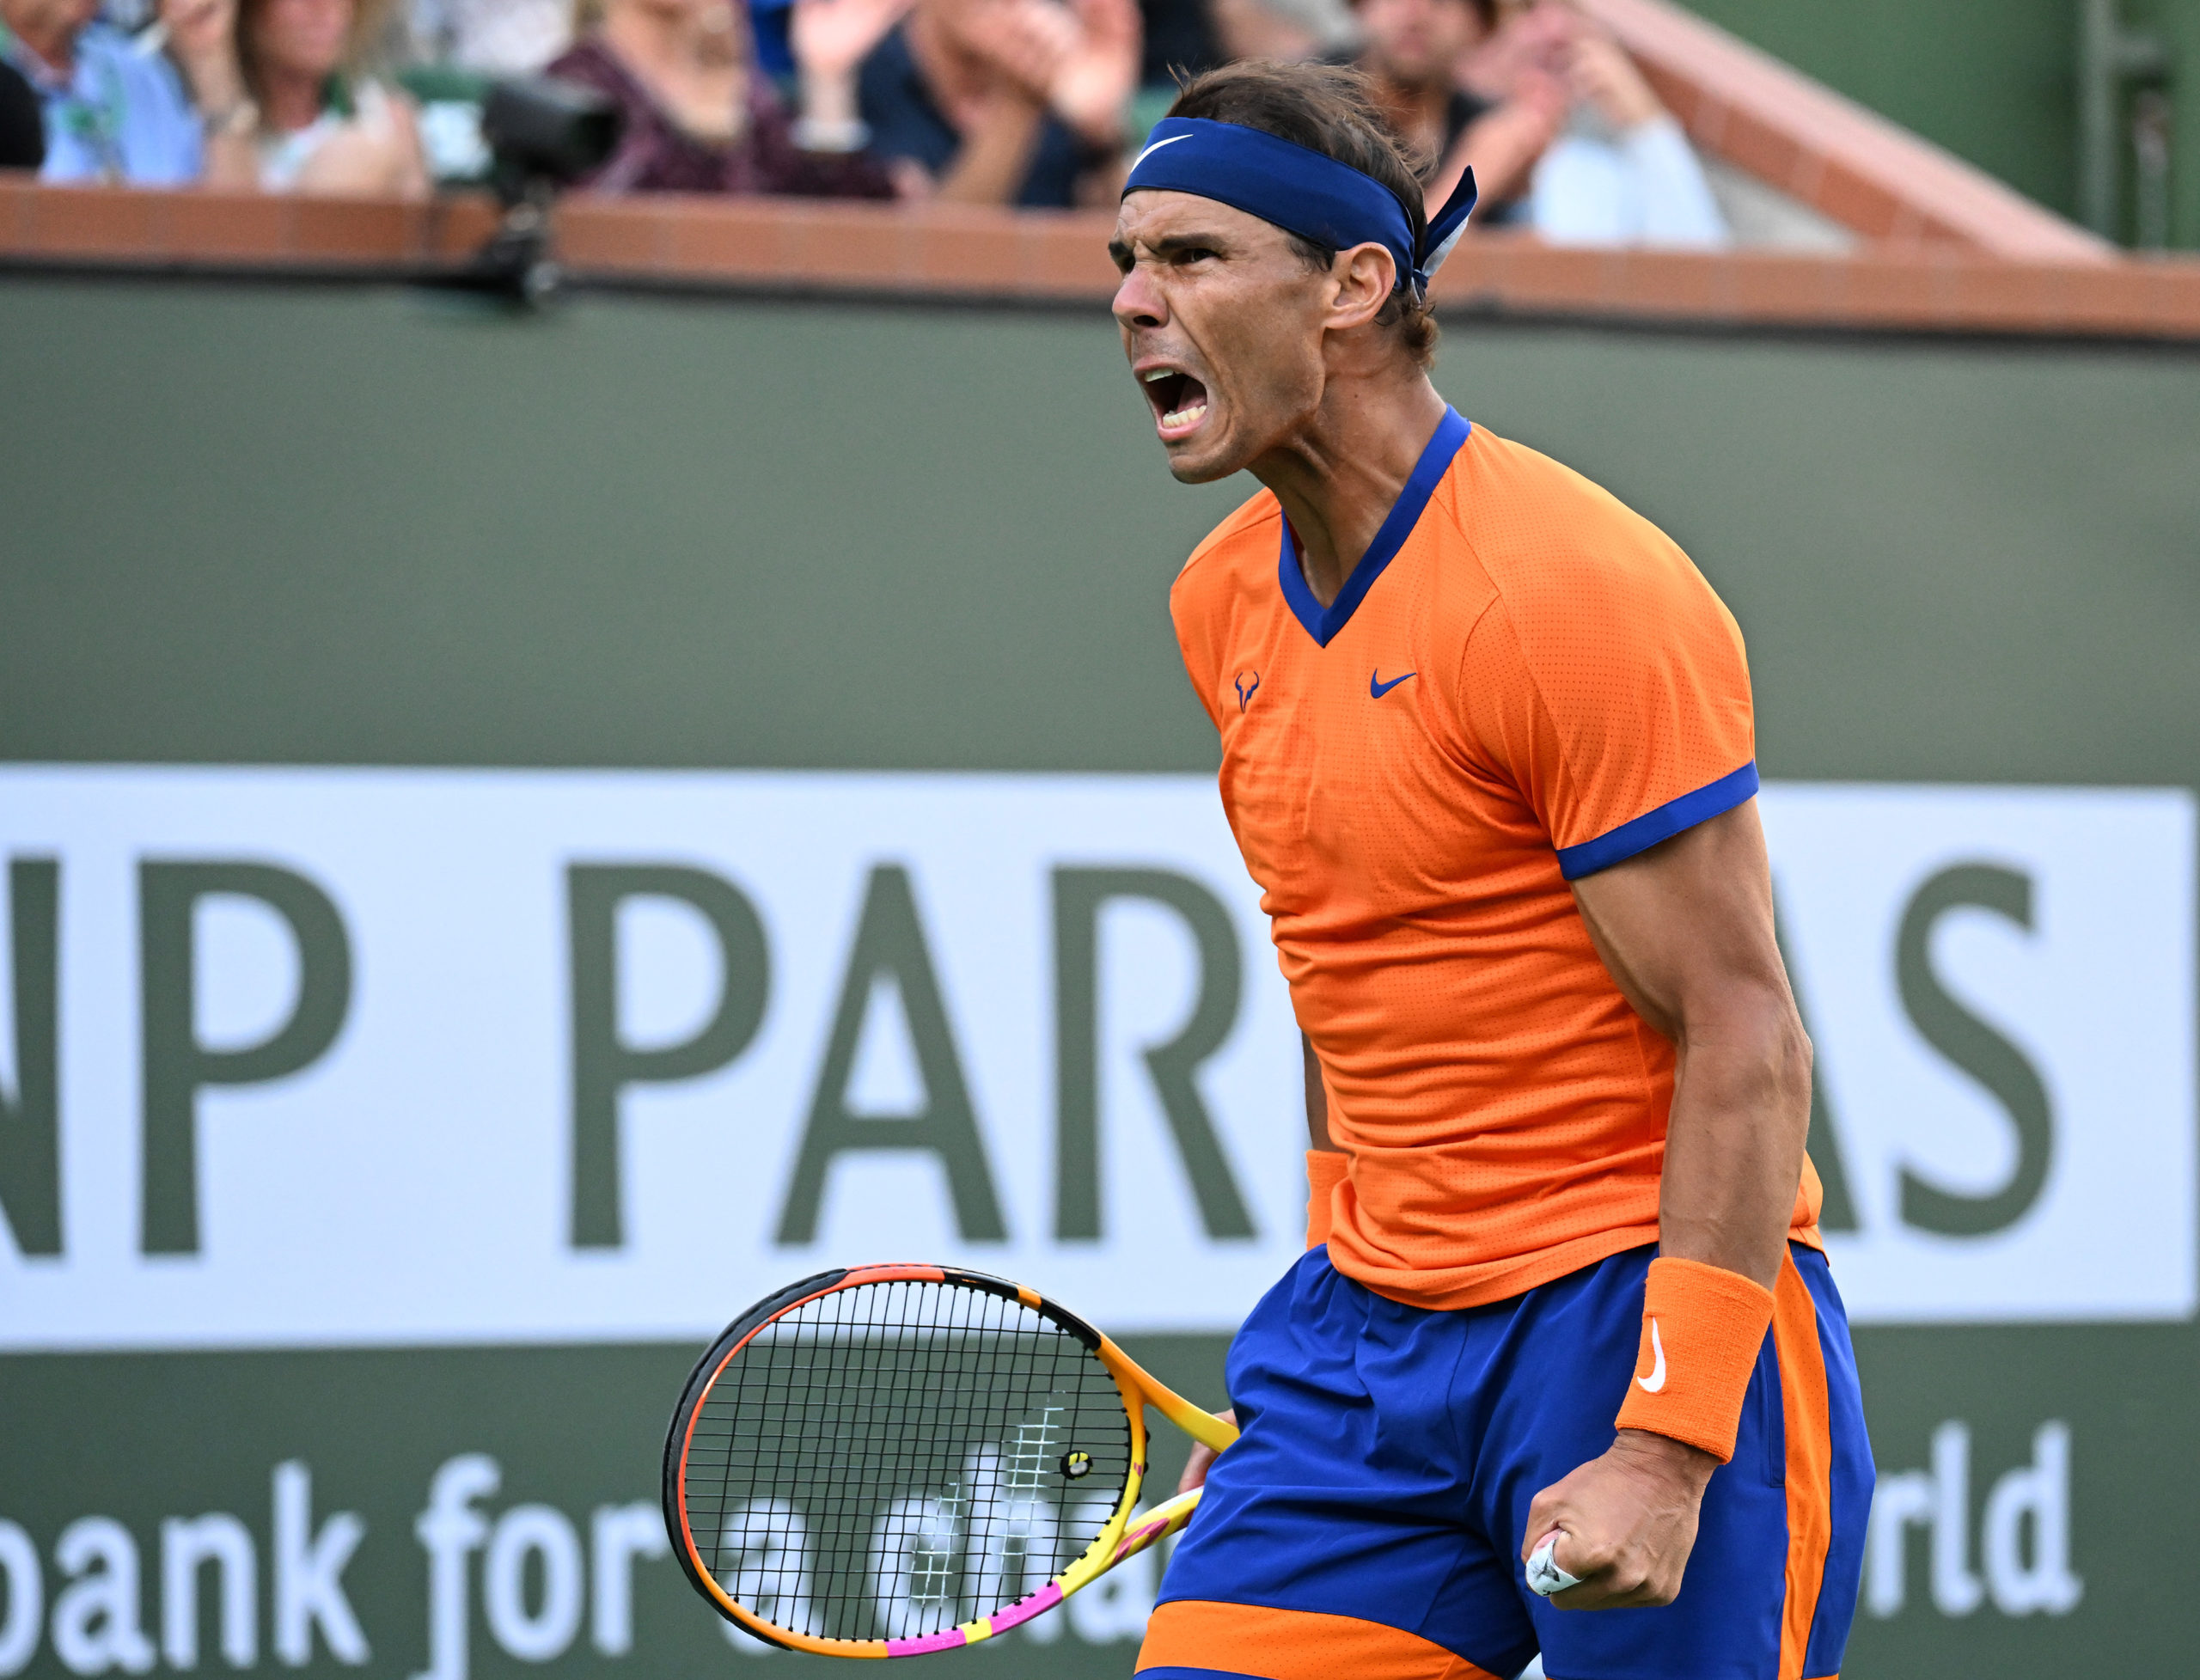 Rafael Nadal (ESP) celebrates after winning a point in his quarterfinal match as he defeated Nick Kyrgios (AUS) at the BNP Paribas Open at the Indian Wells Tennis 